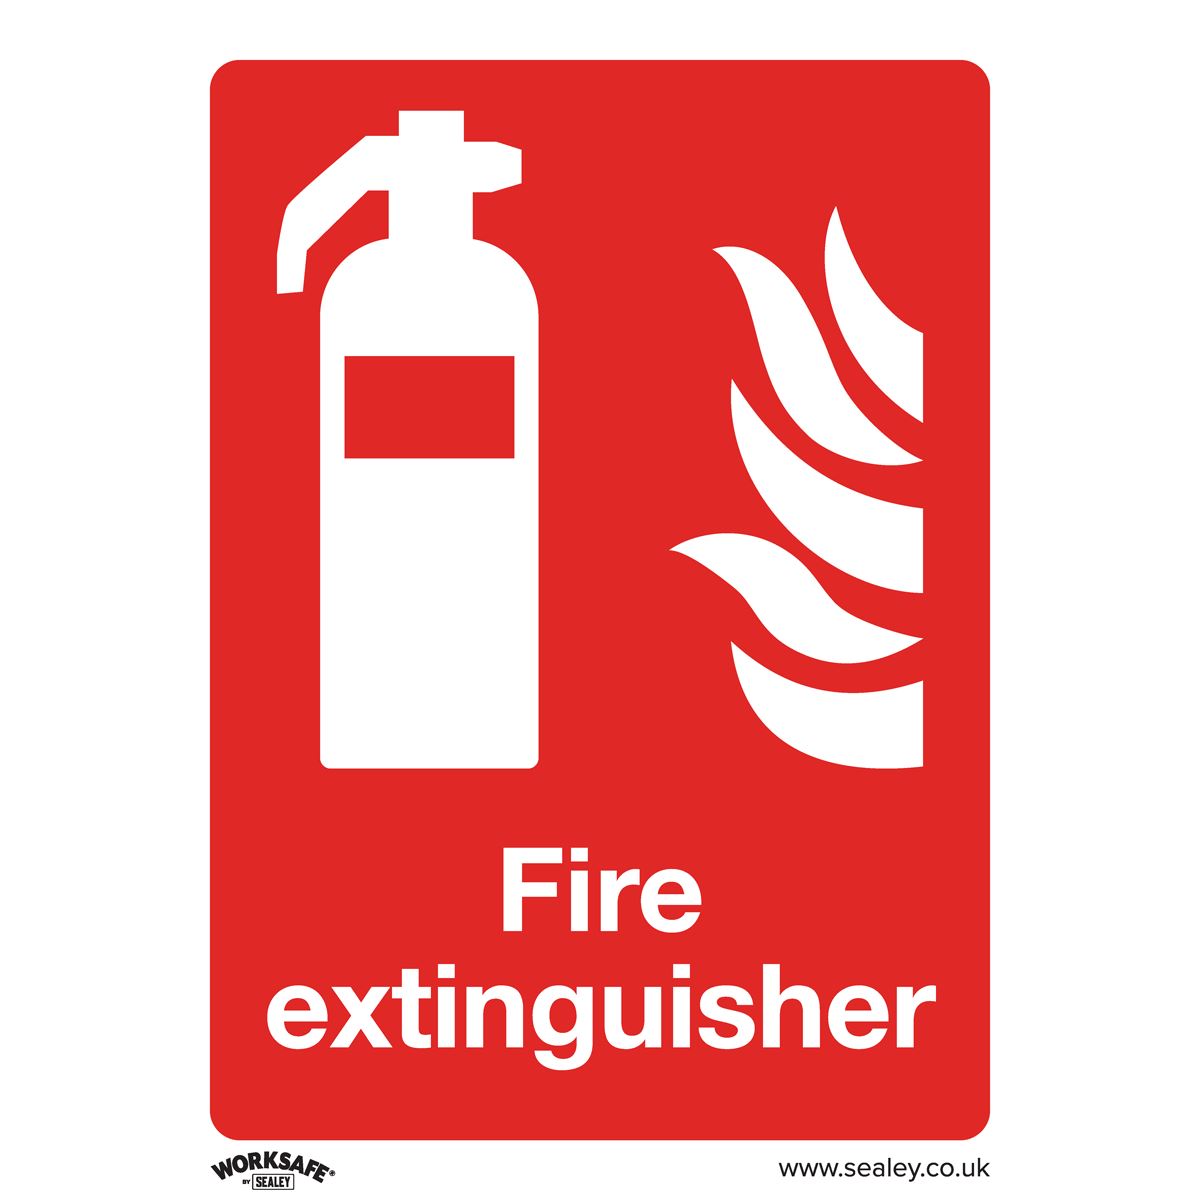 Worksafe by Sealey Information Safety Sign - Fire Extinguisher - Self-Adhesive Vinyl